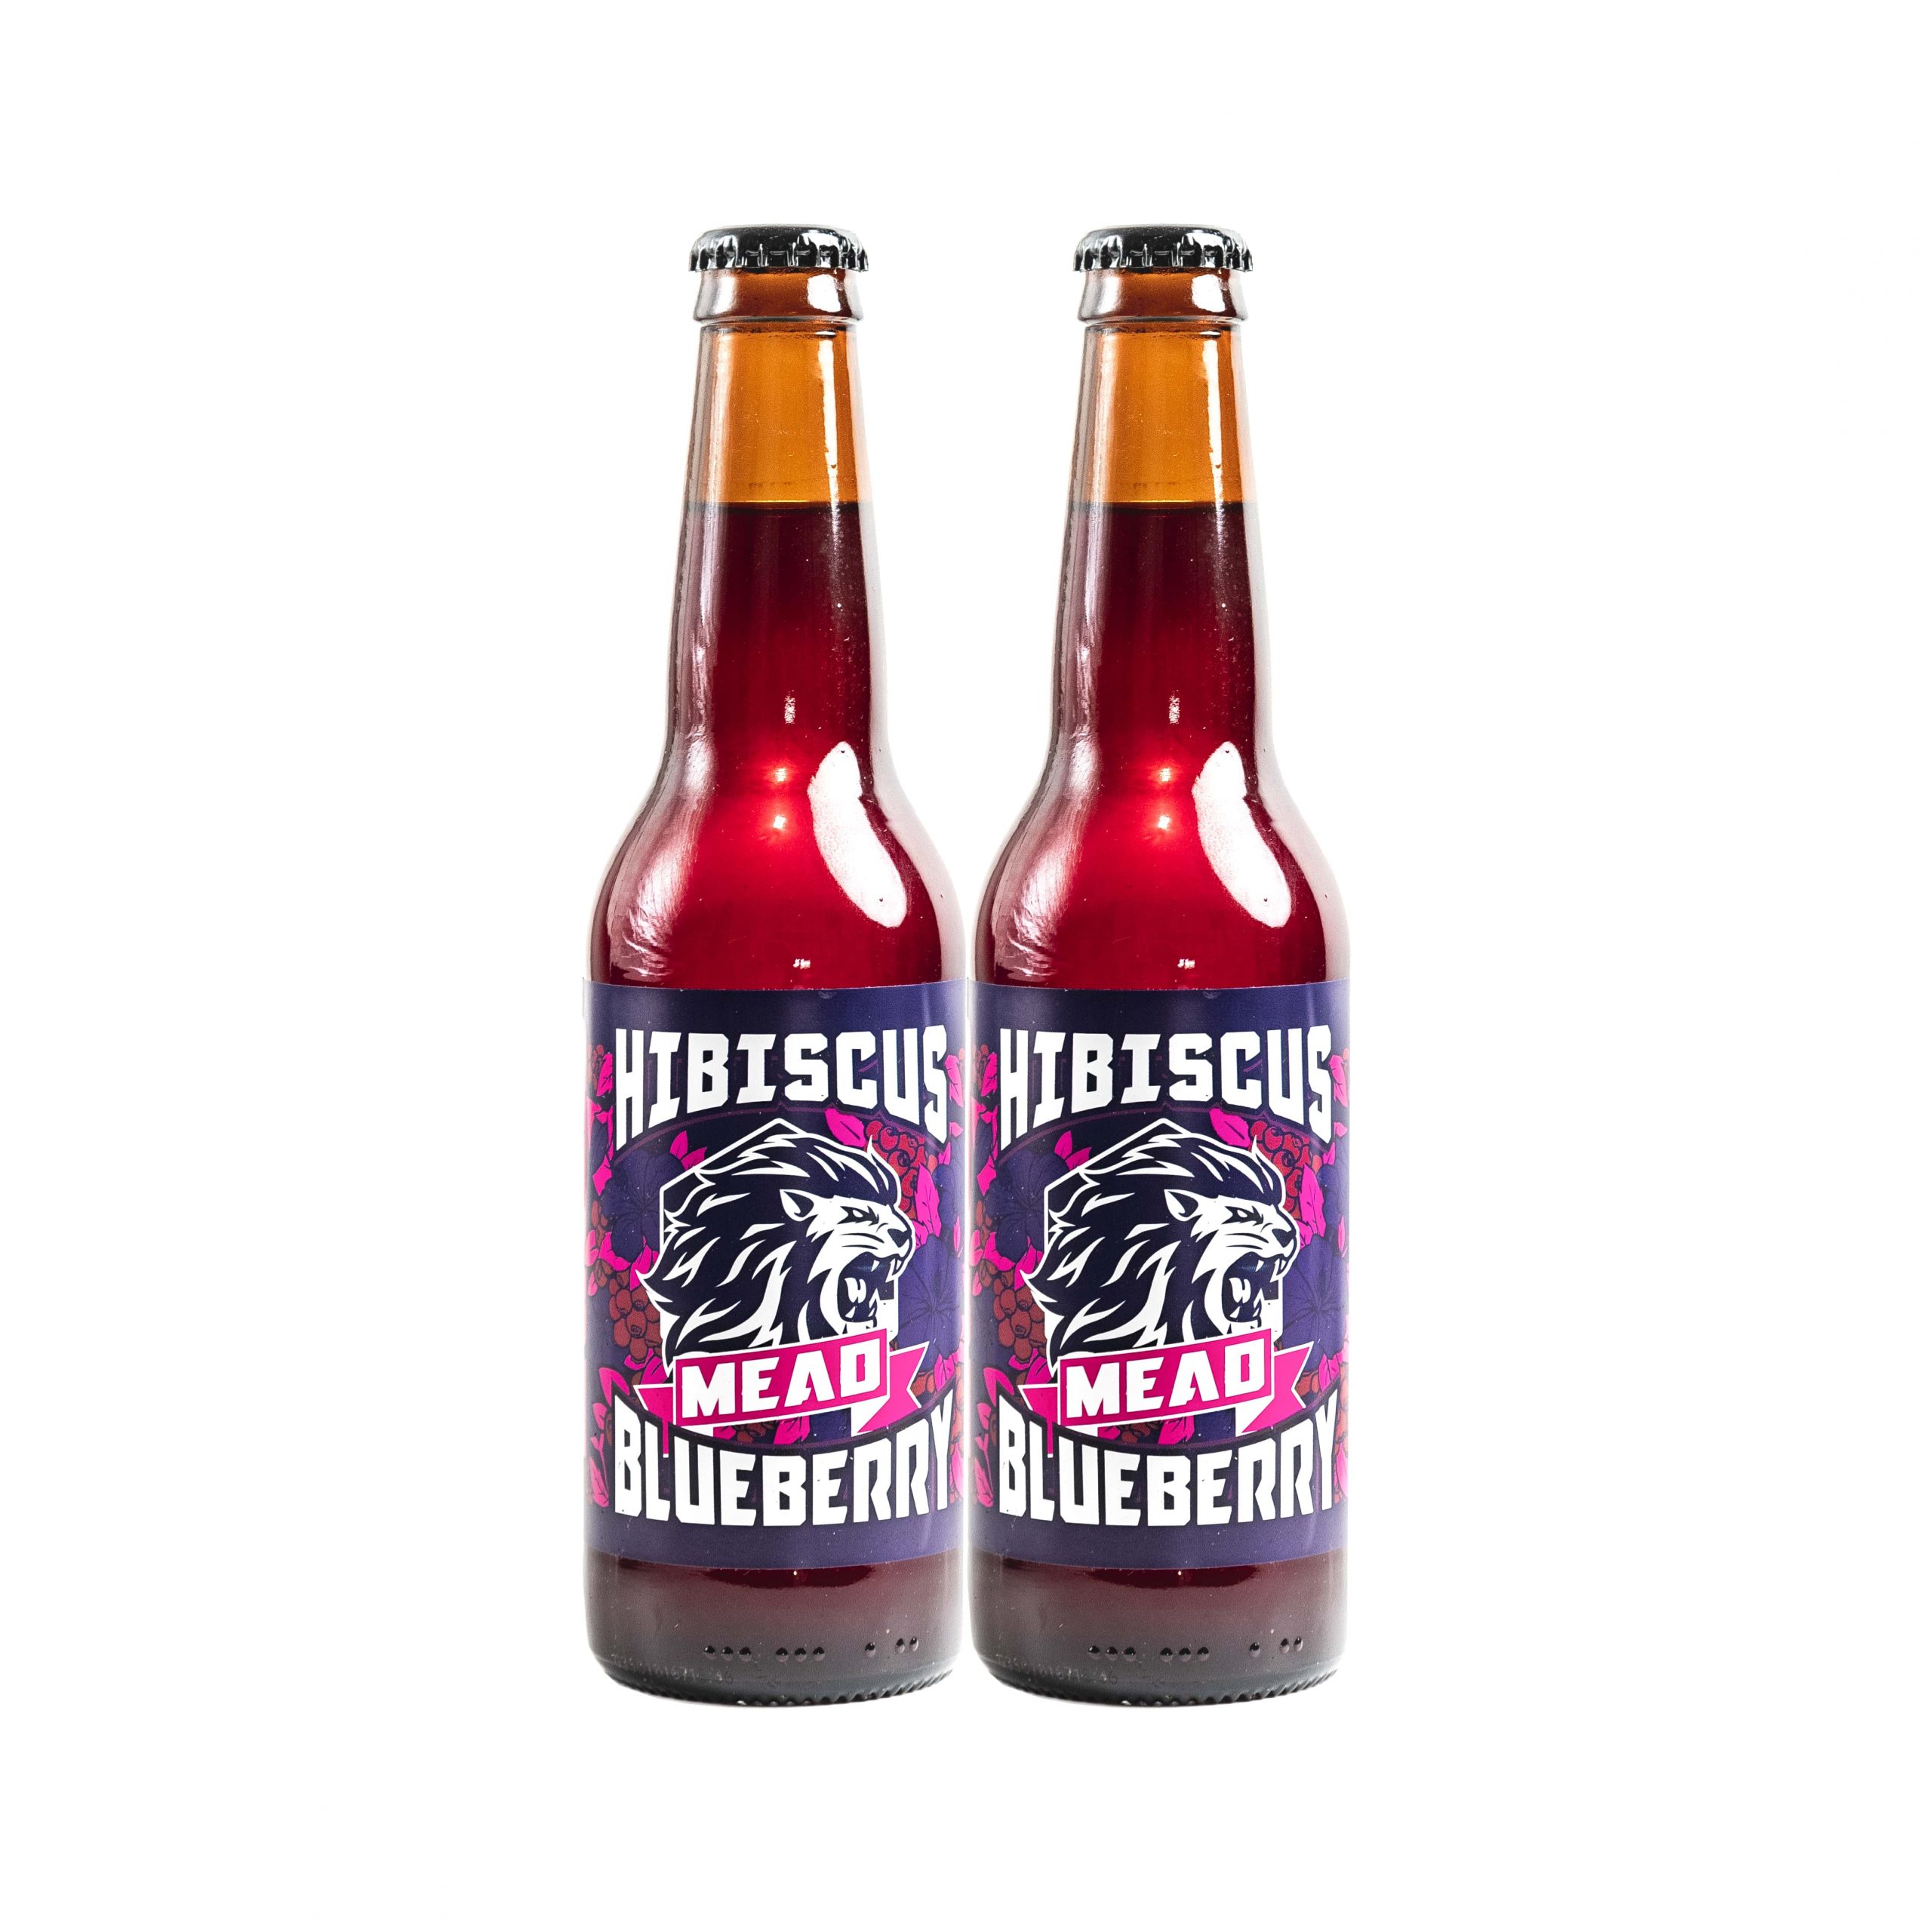 Lion City Meadery Hibiscus Blueberry Mead (2x 330ml)